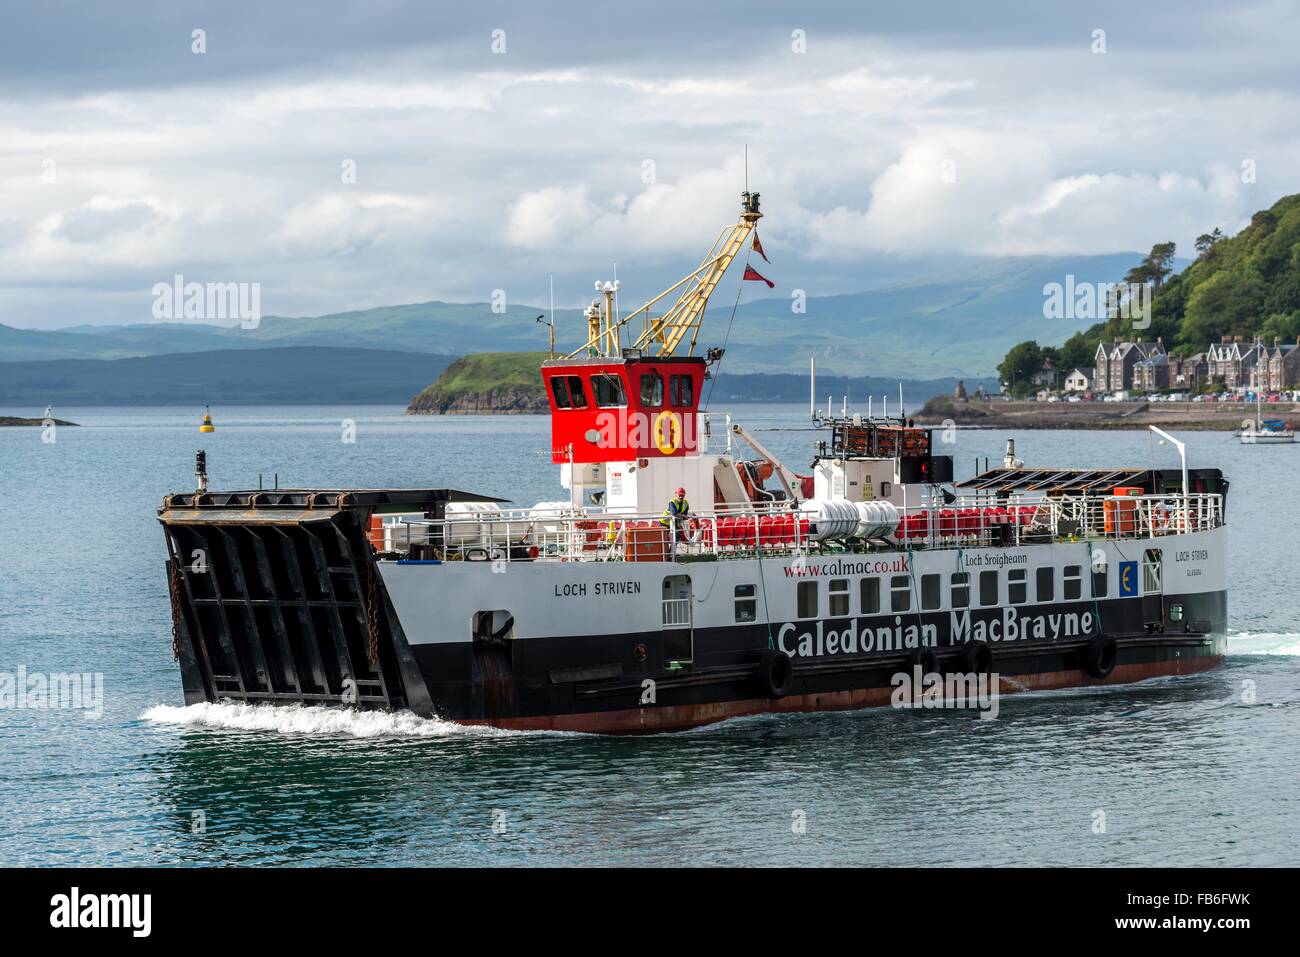 Caledonian MacBrayne ferries Banque D'Images